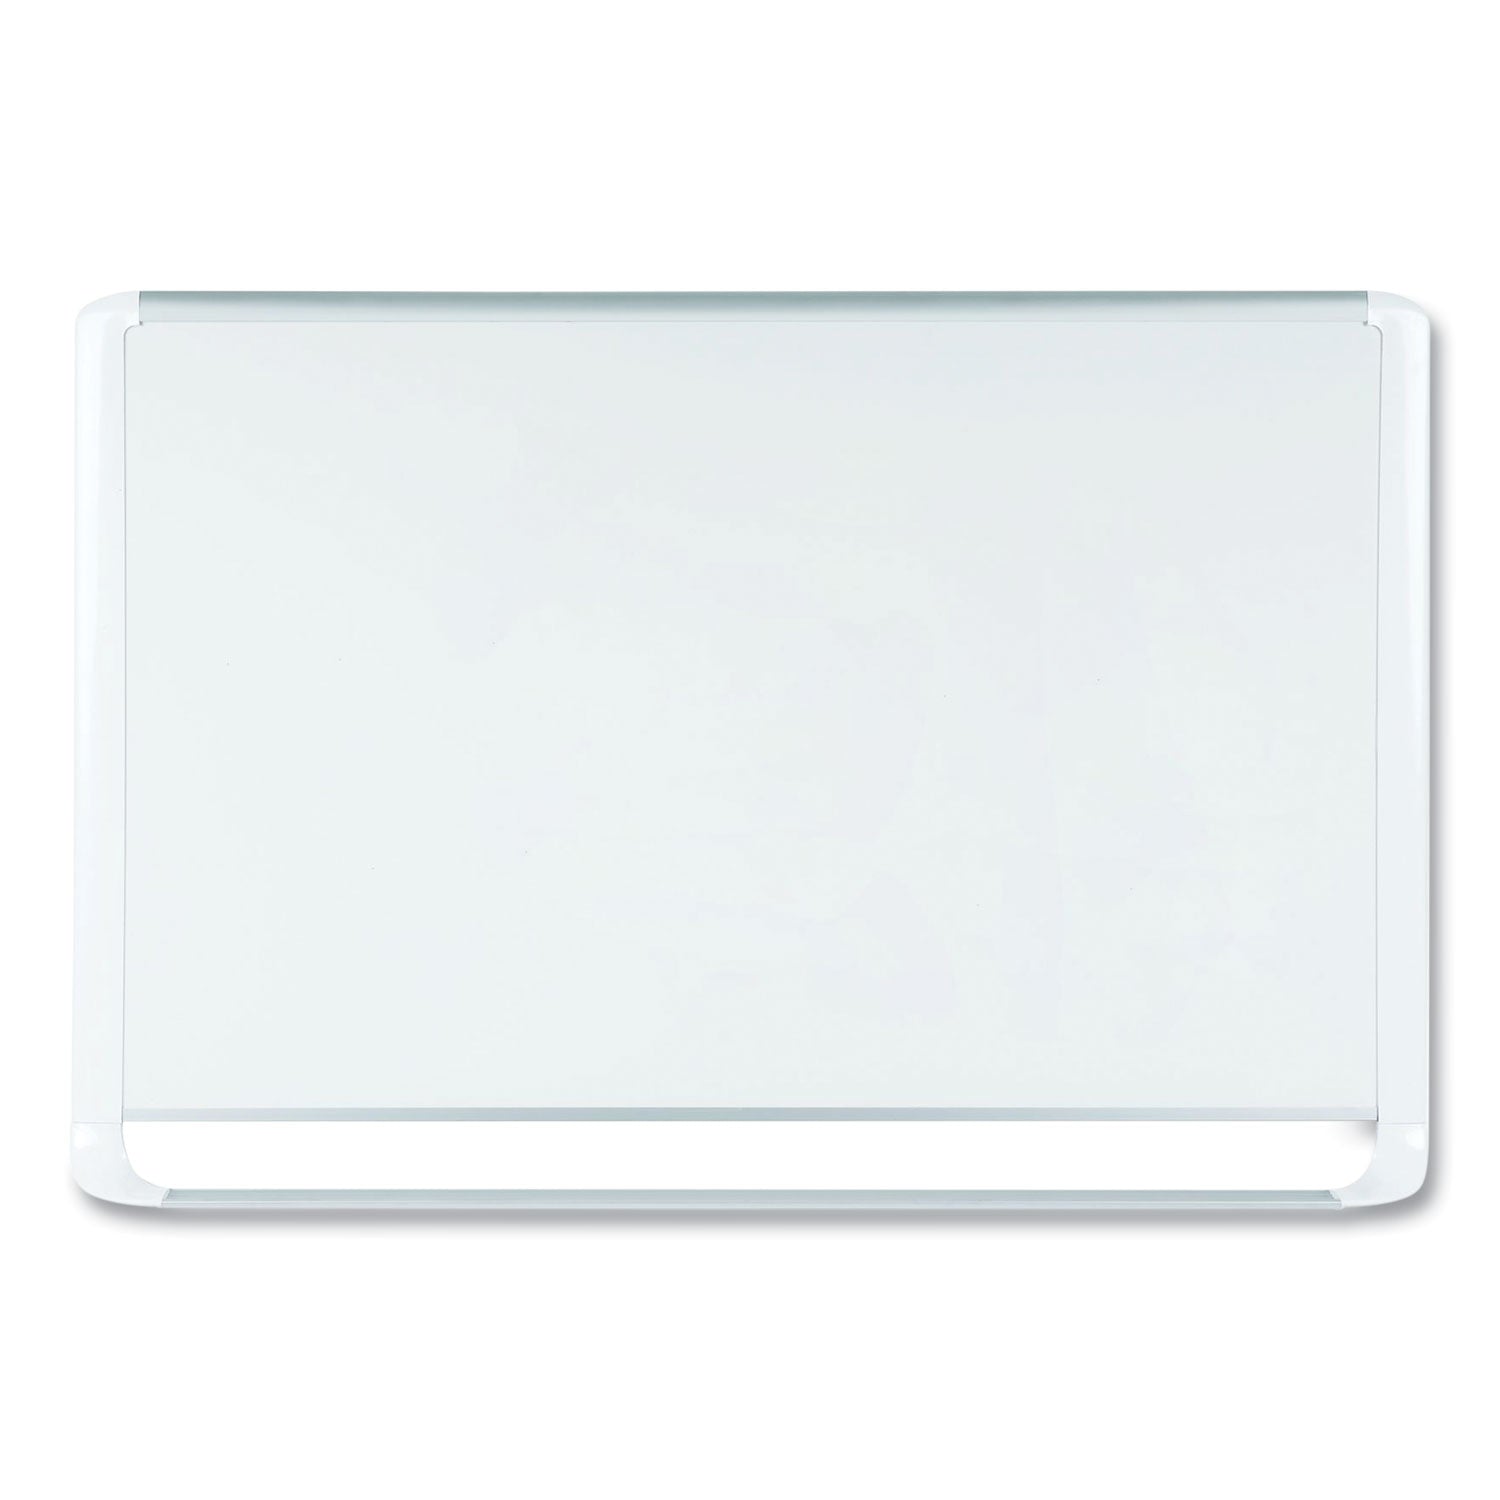 Gold Ultra Magnetic Dry Erase Boards, 72 x 48, White Surface, White Aluminum Frame - 1